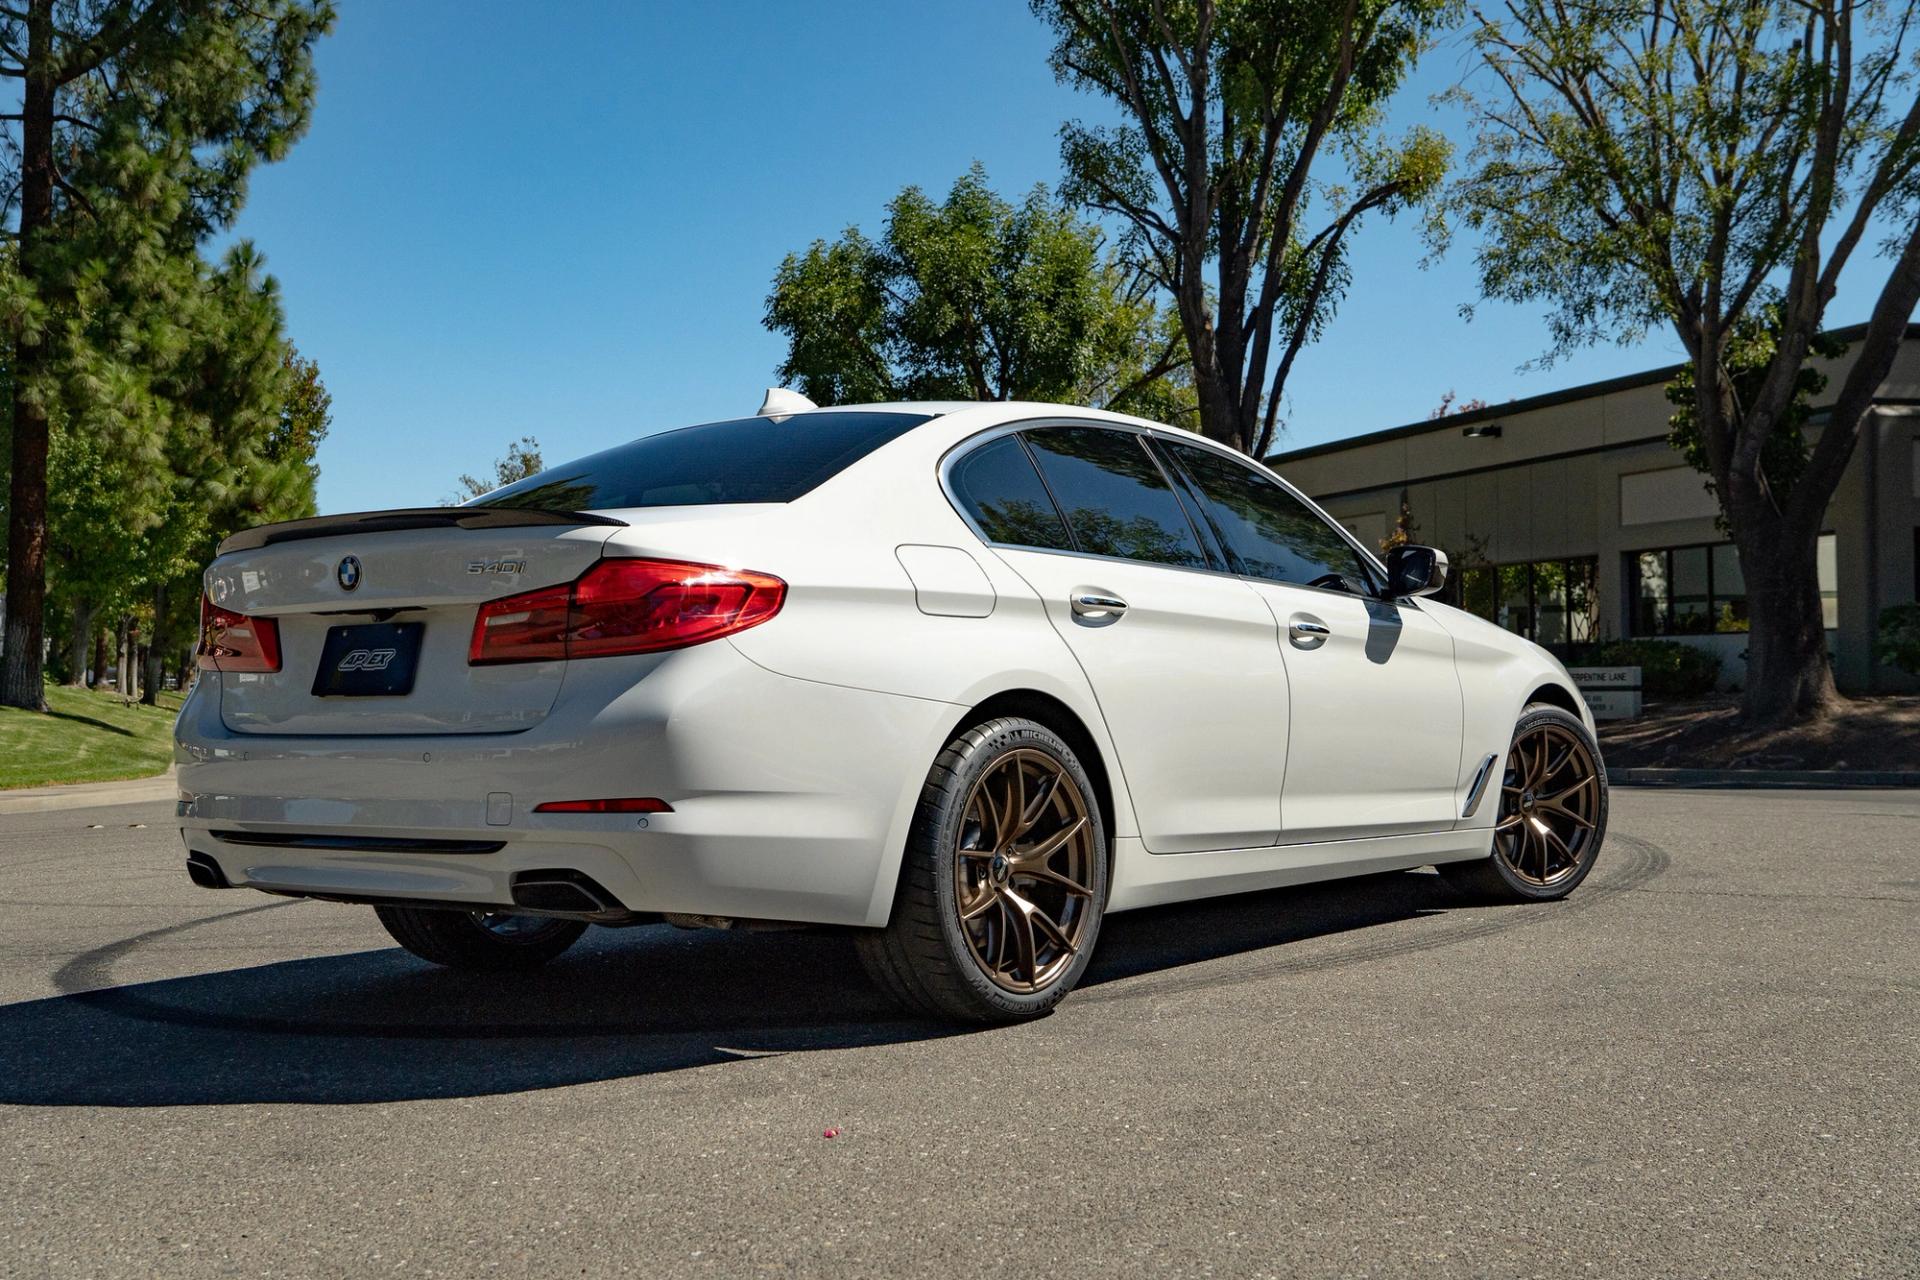 BMW G31 Wagon 5 Series with 19" VS-5RS in Satin Bronze